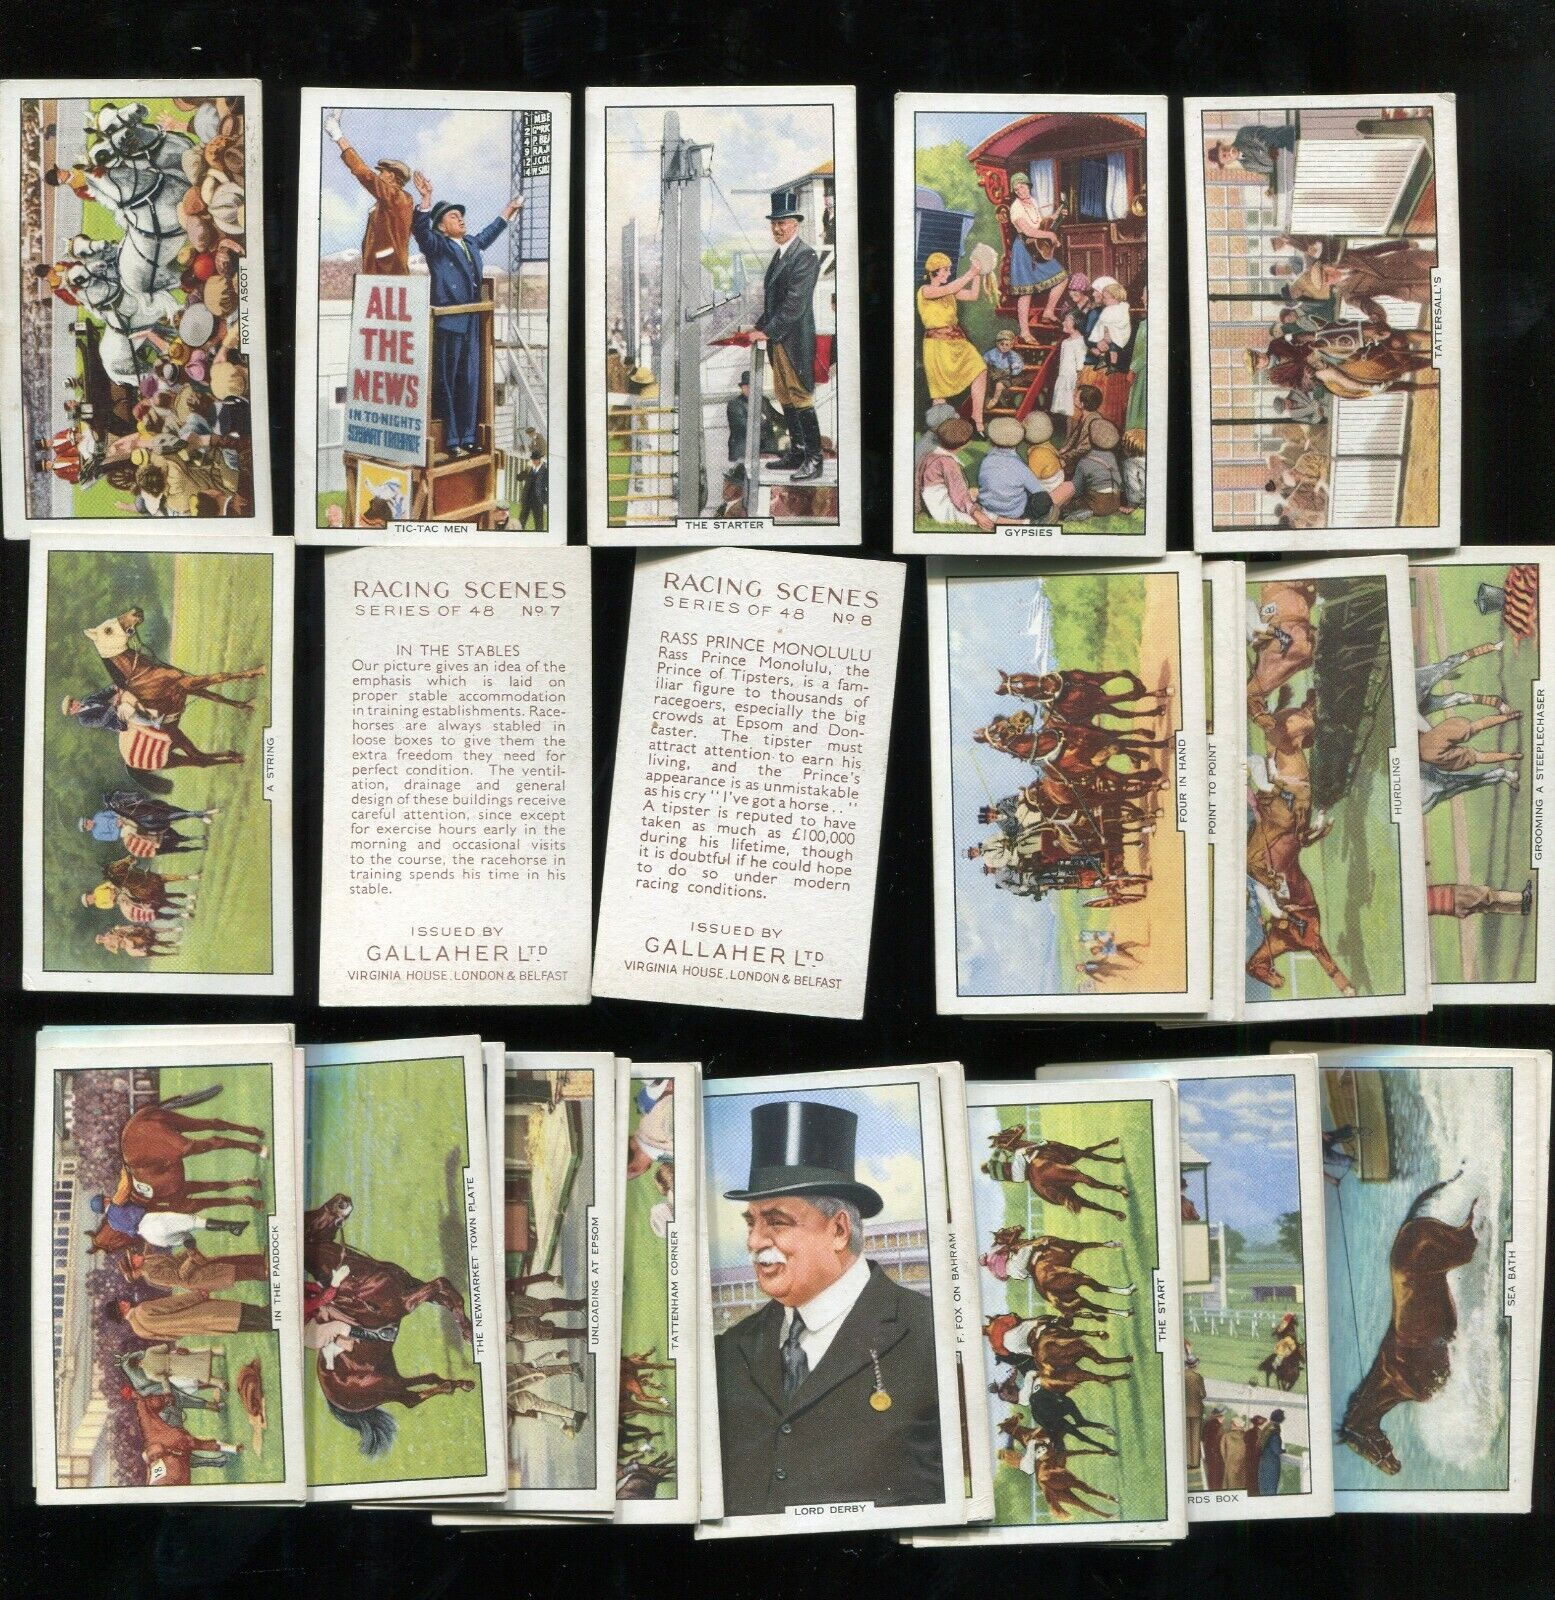 1938 GALLAHER LTD STARS OF RACING SCENES 48 DIFFERENT TOBACCO CARD SET HORSES